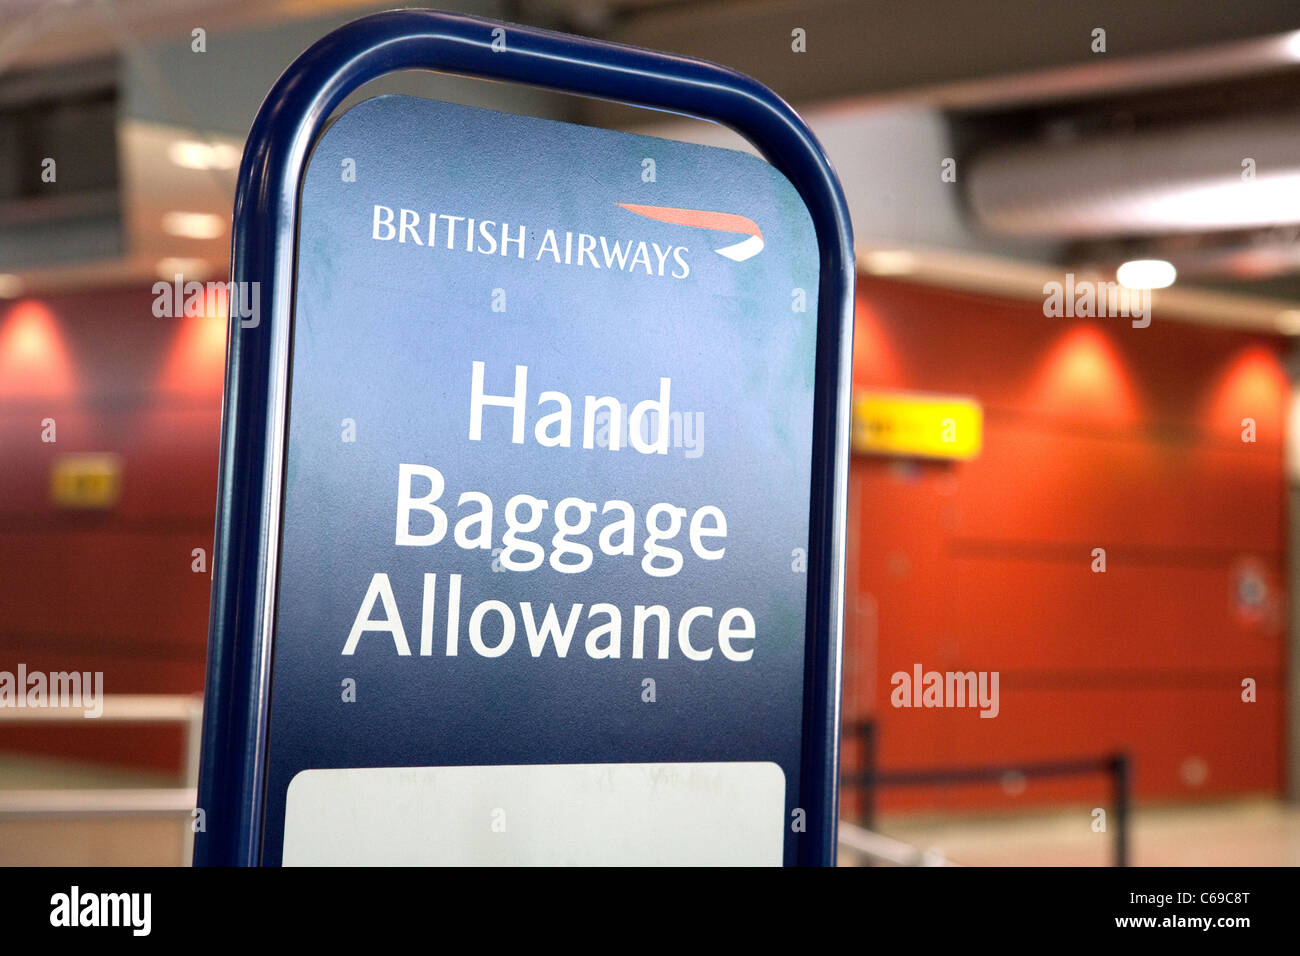 Baggage Airport Allowance Stock Photos Baggage Airport Allowance